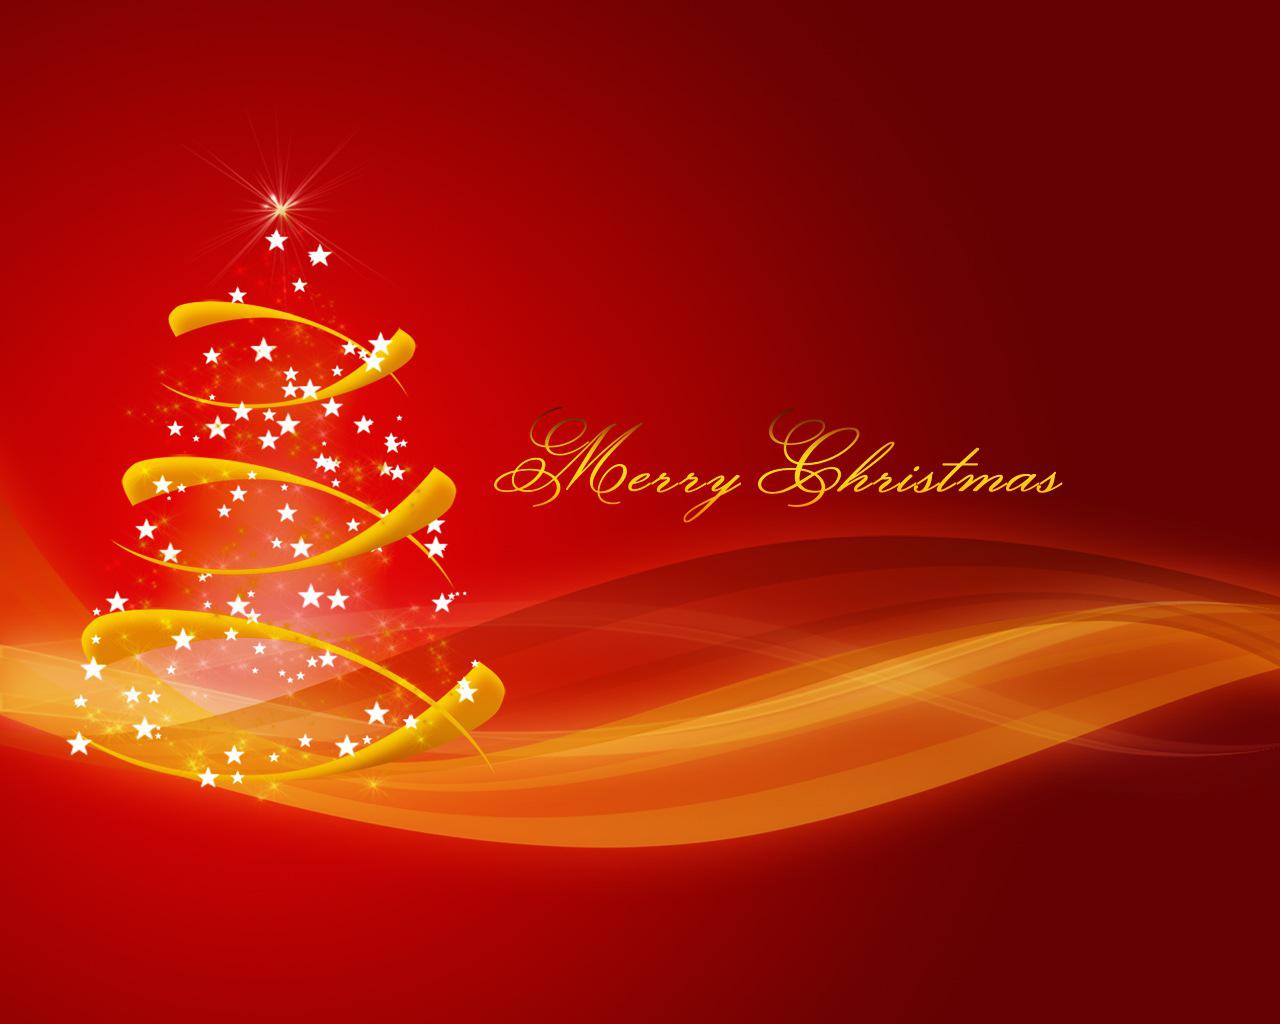 Powerpoint Christmas Backgrounds Free christmas powerpoint